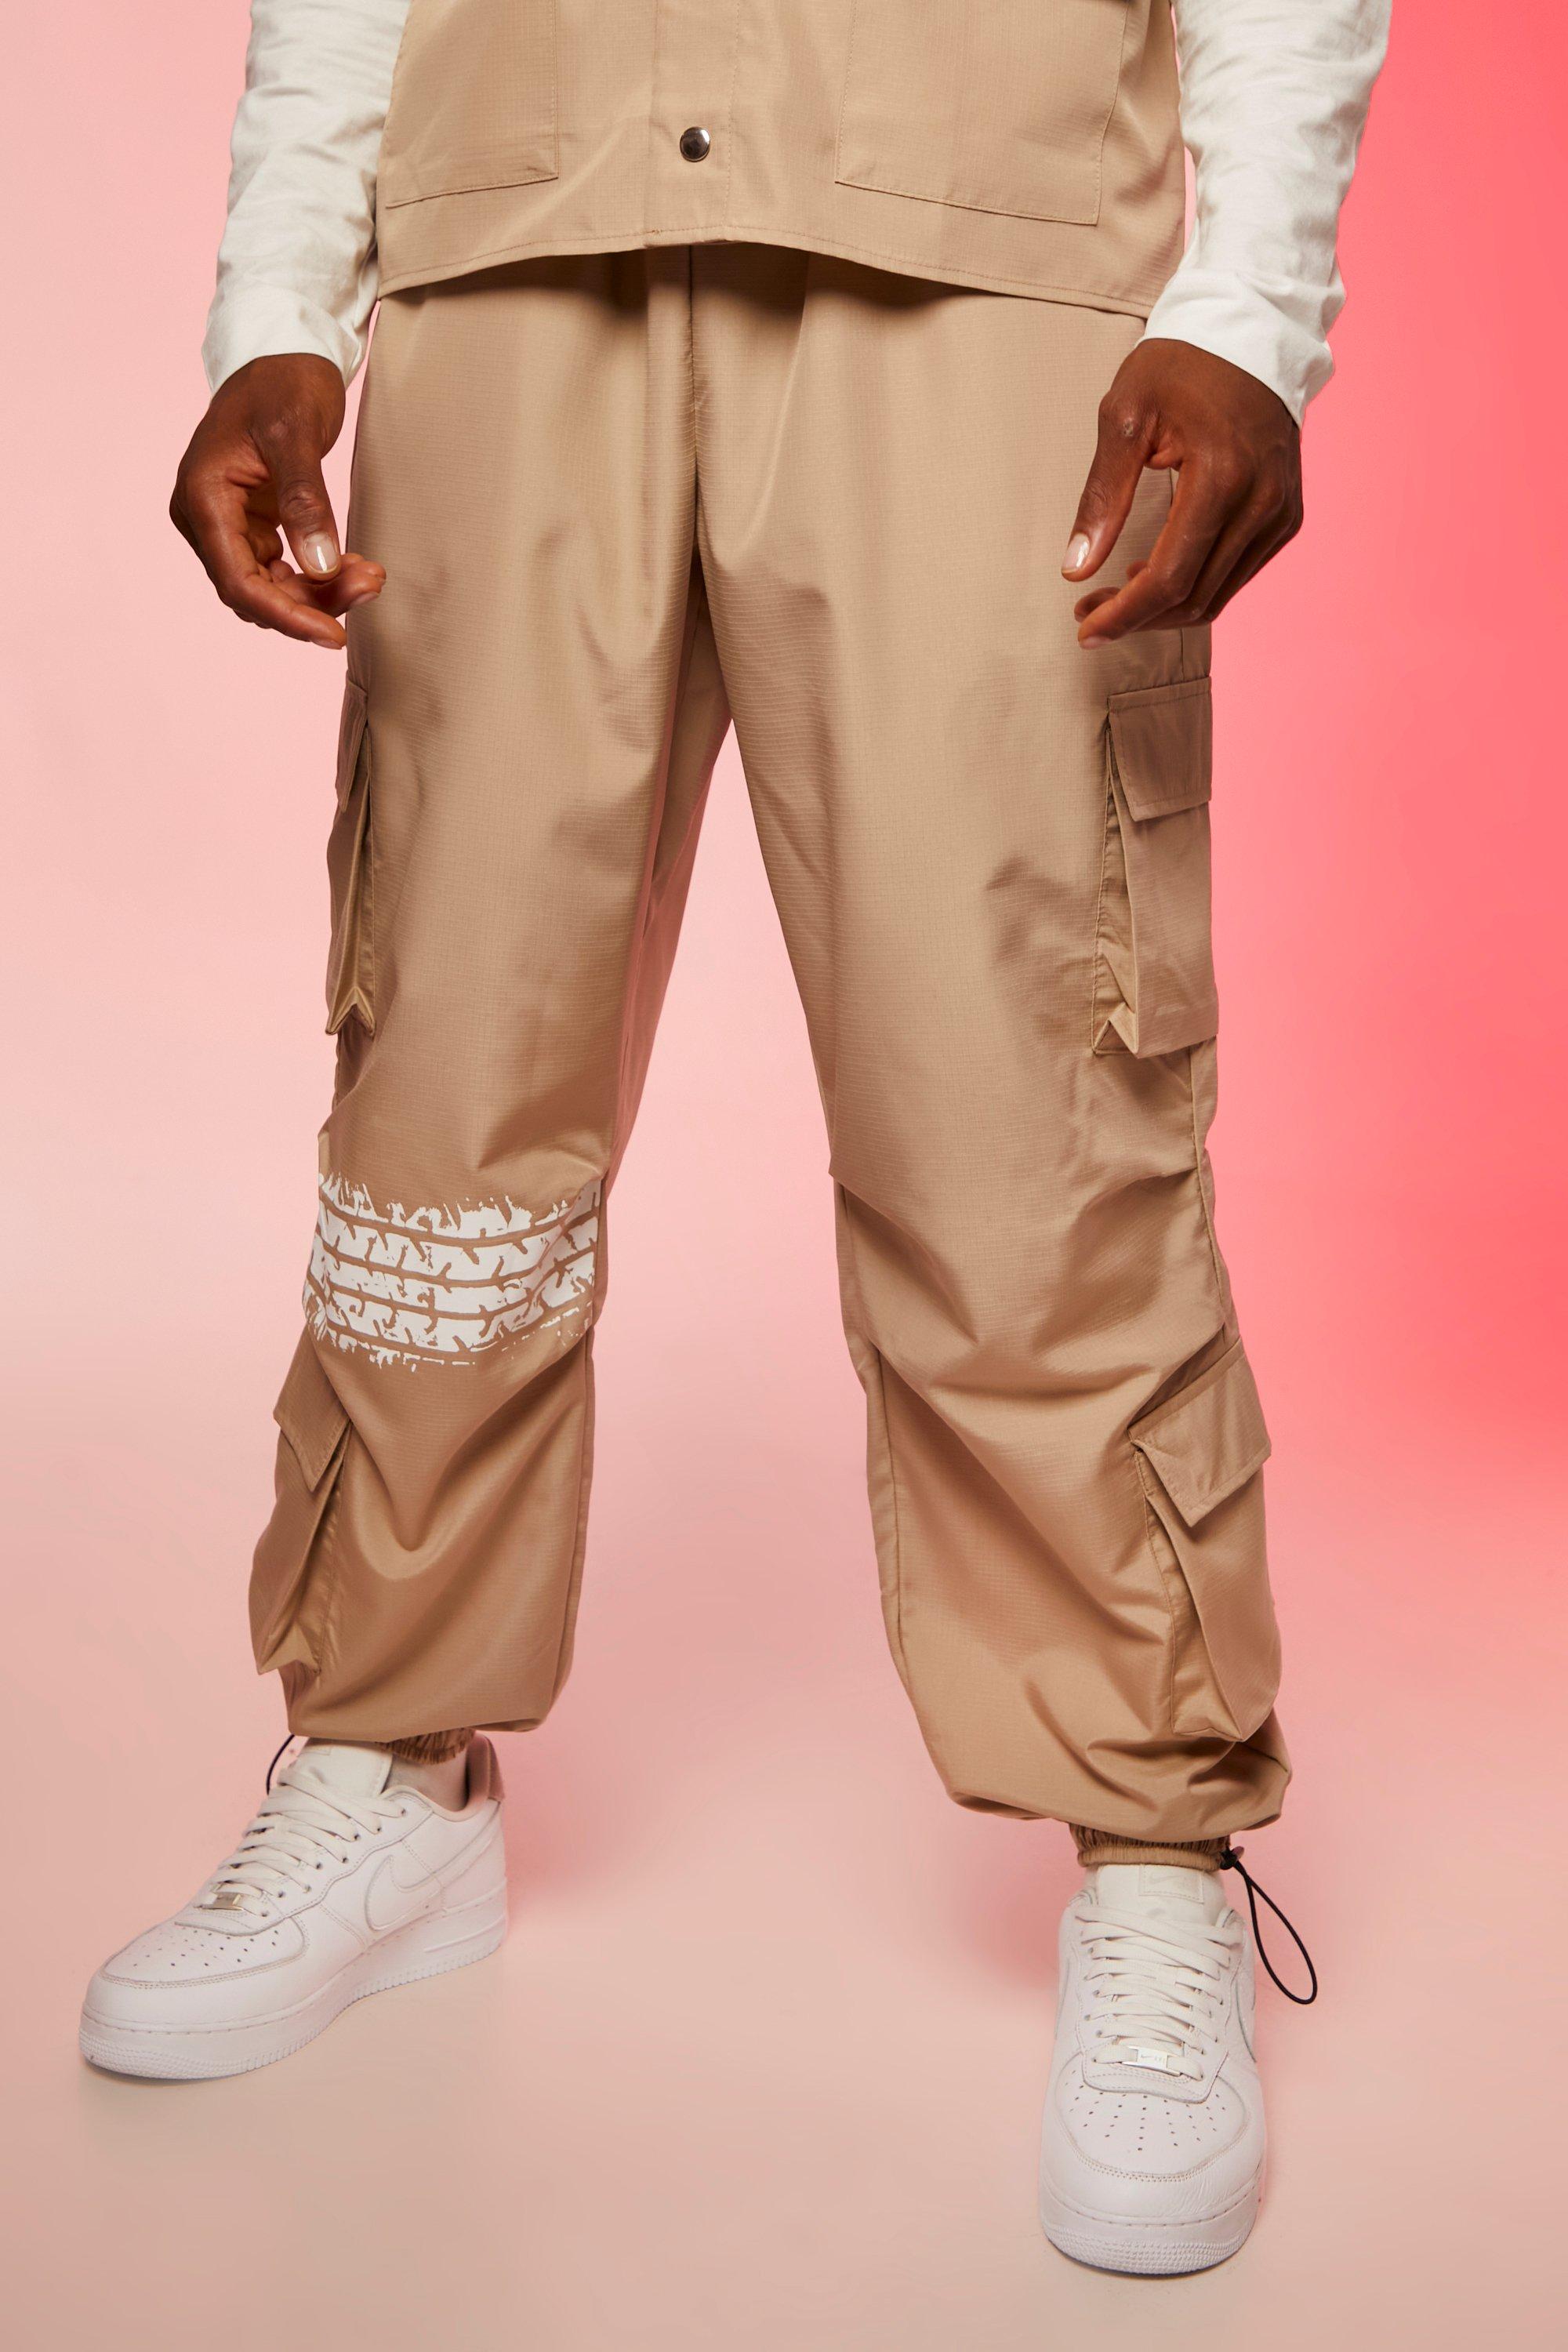 pantalon cargo baggy à poches multiples homme - taupe - xs, taupe